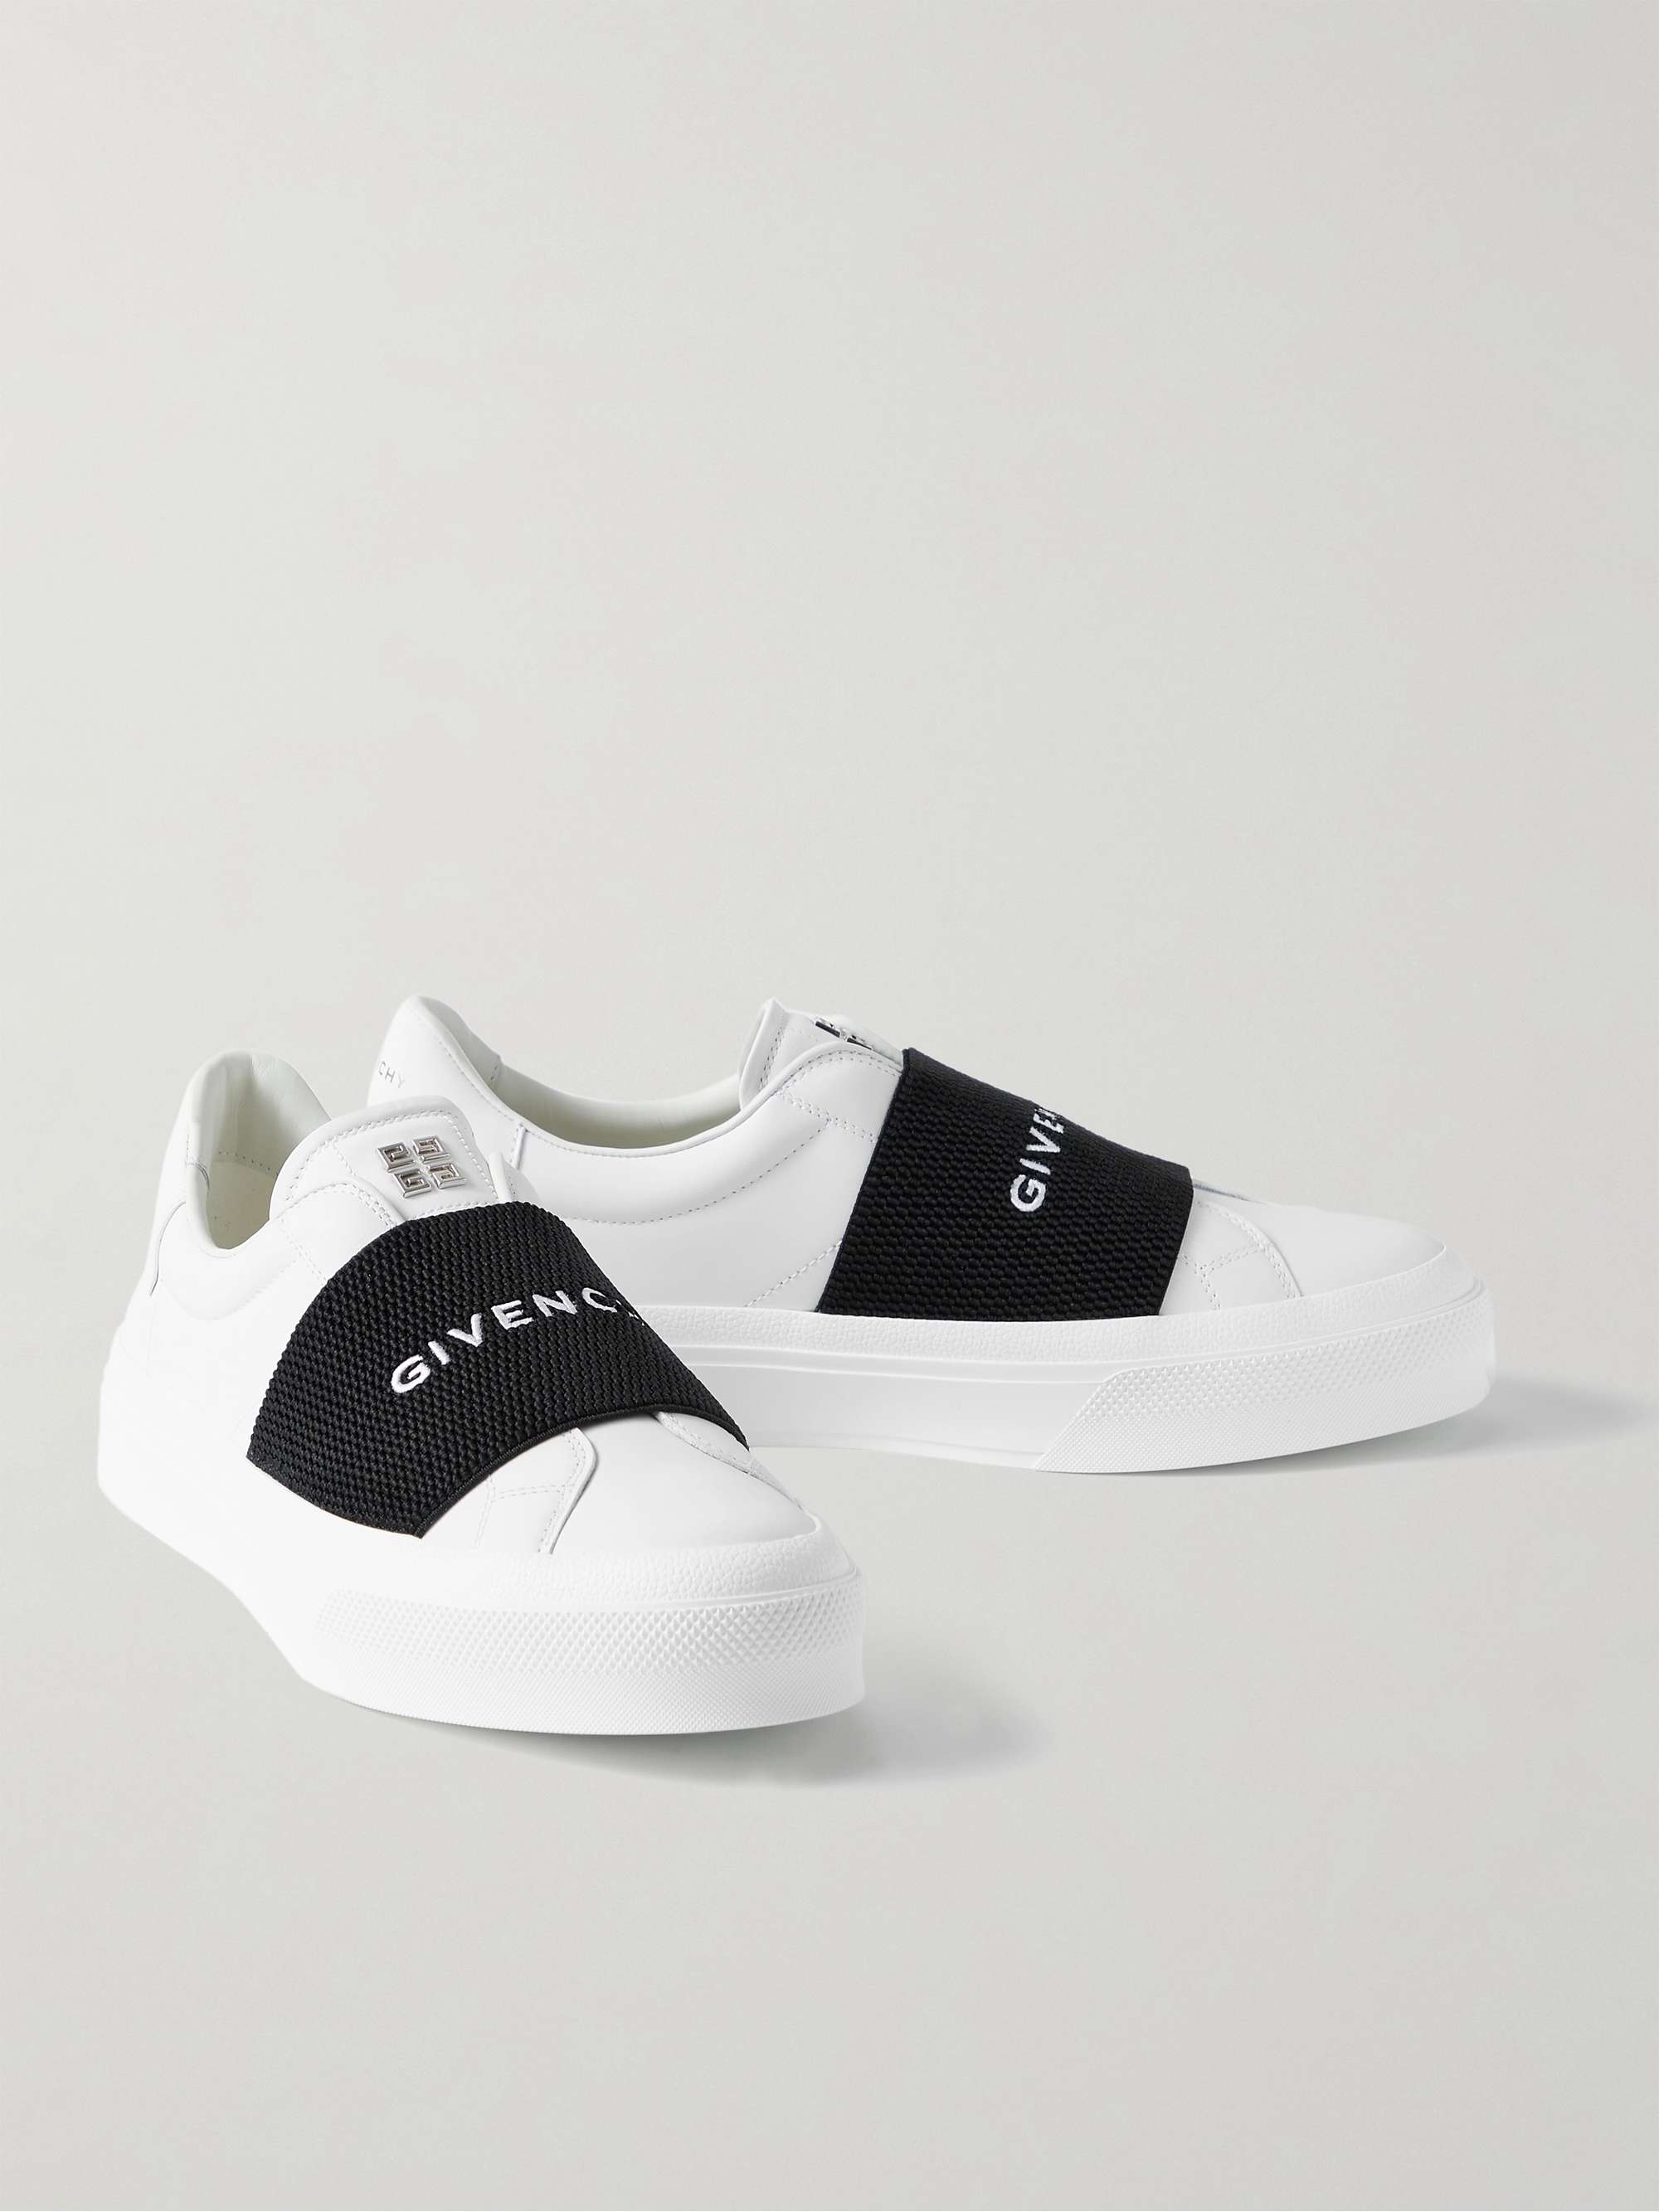 GIVENCHY City Sport Slip-On Leather Sneakers | MR PORTER